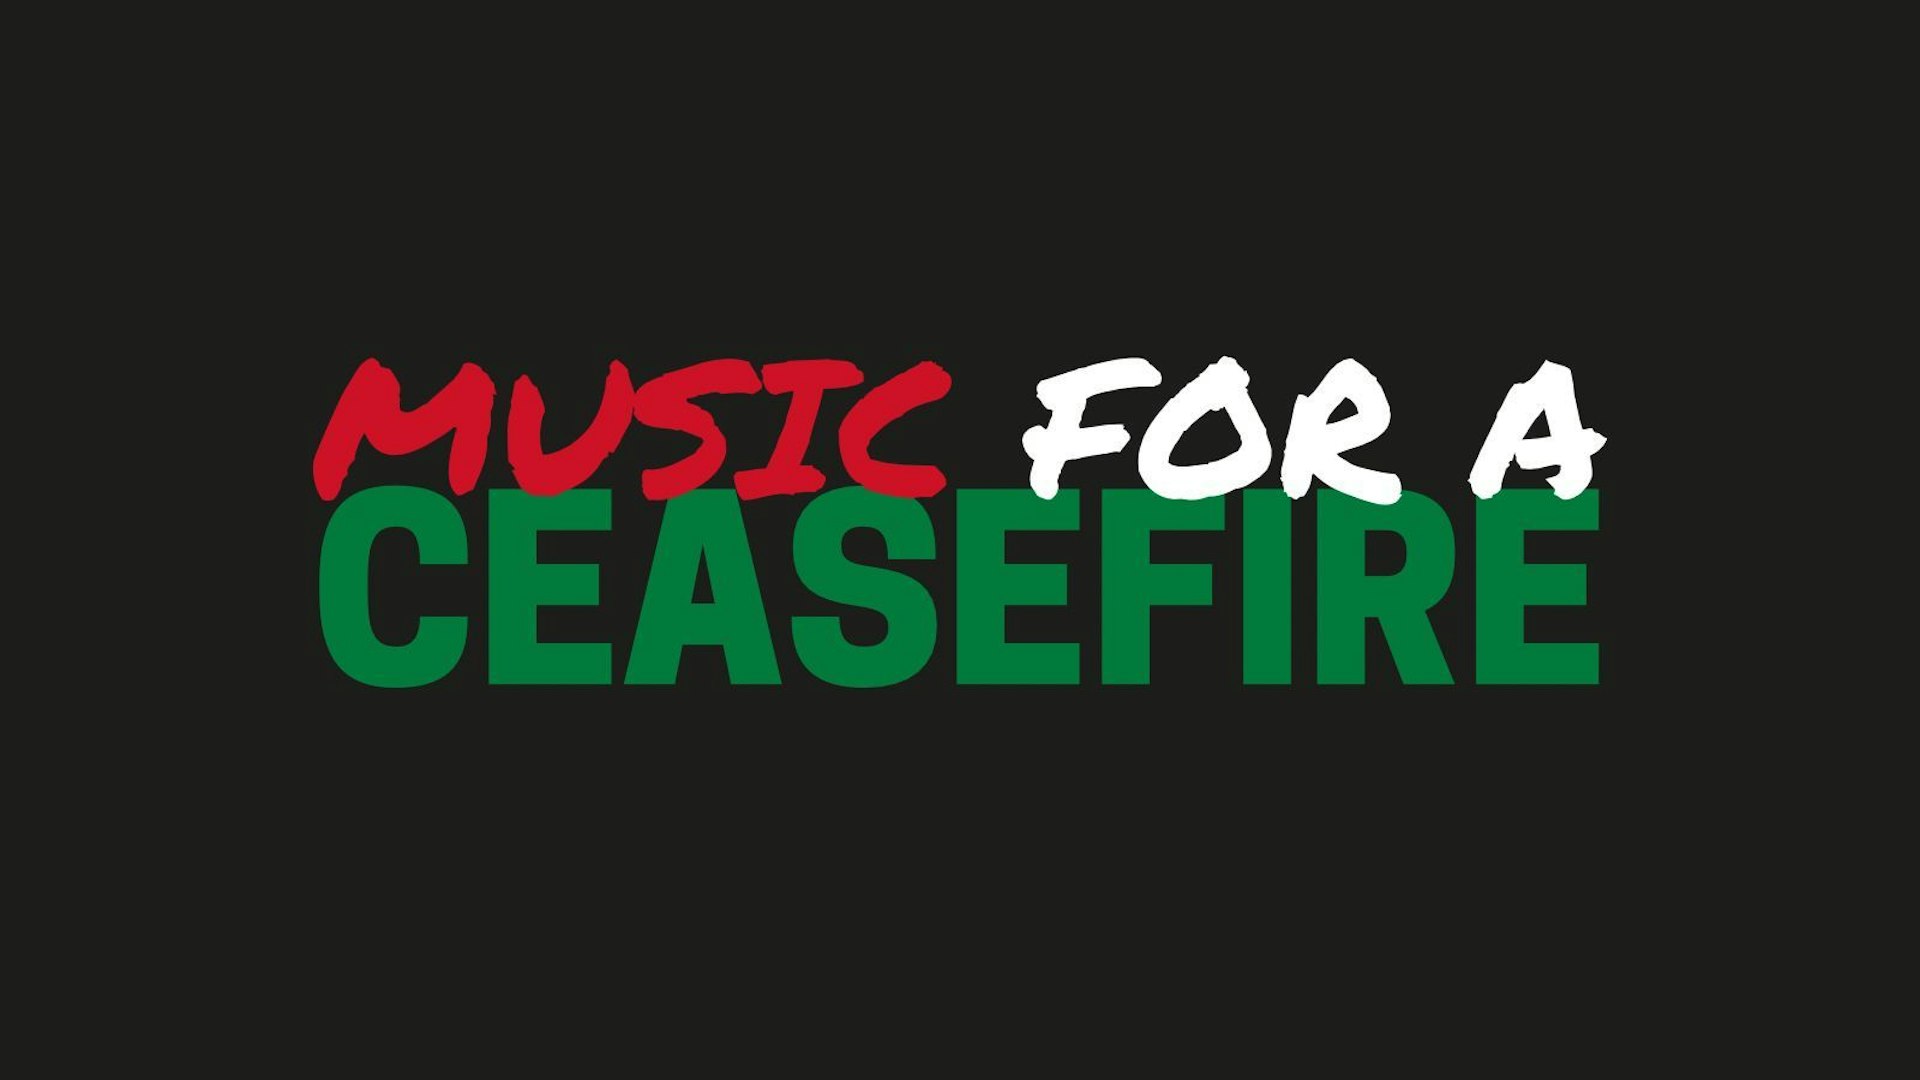 Enter Shikari, Kneecap and more on why musicians are calling for a permanent ceasefire in Gaza